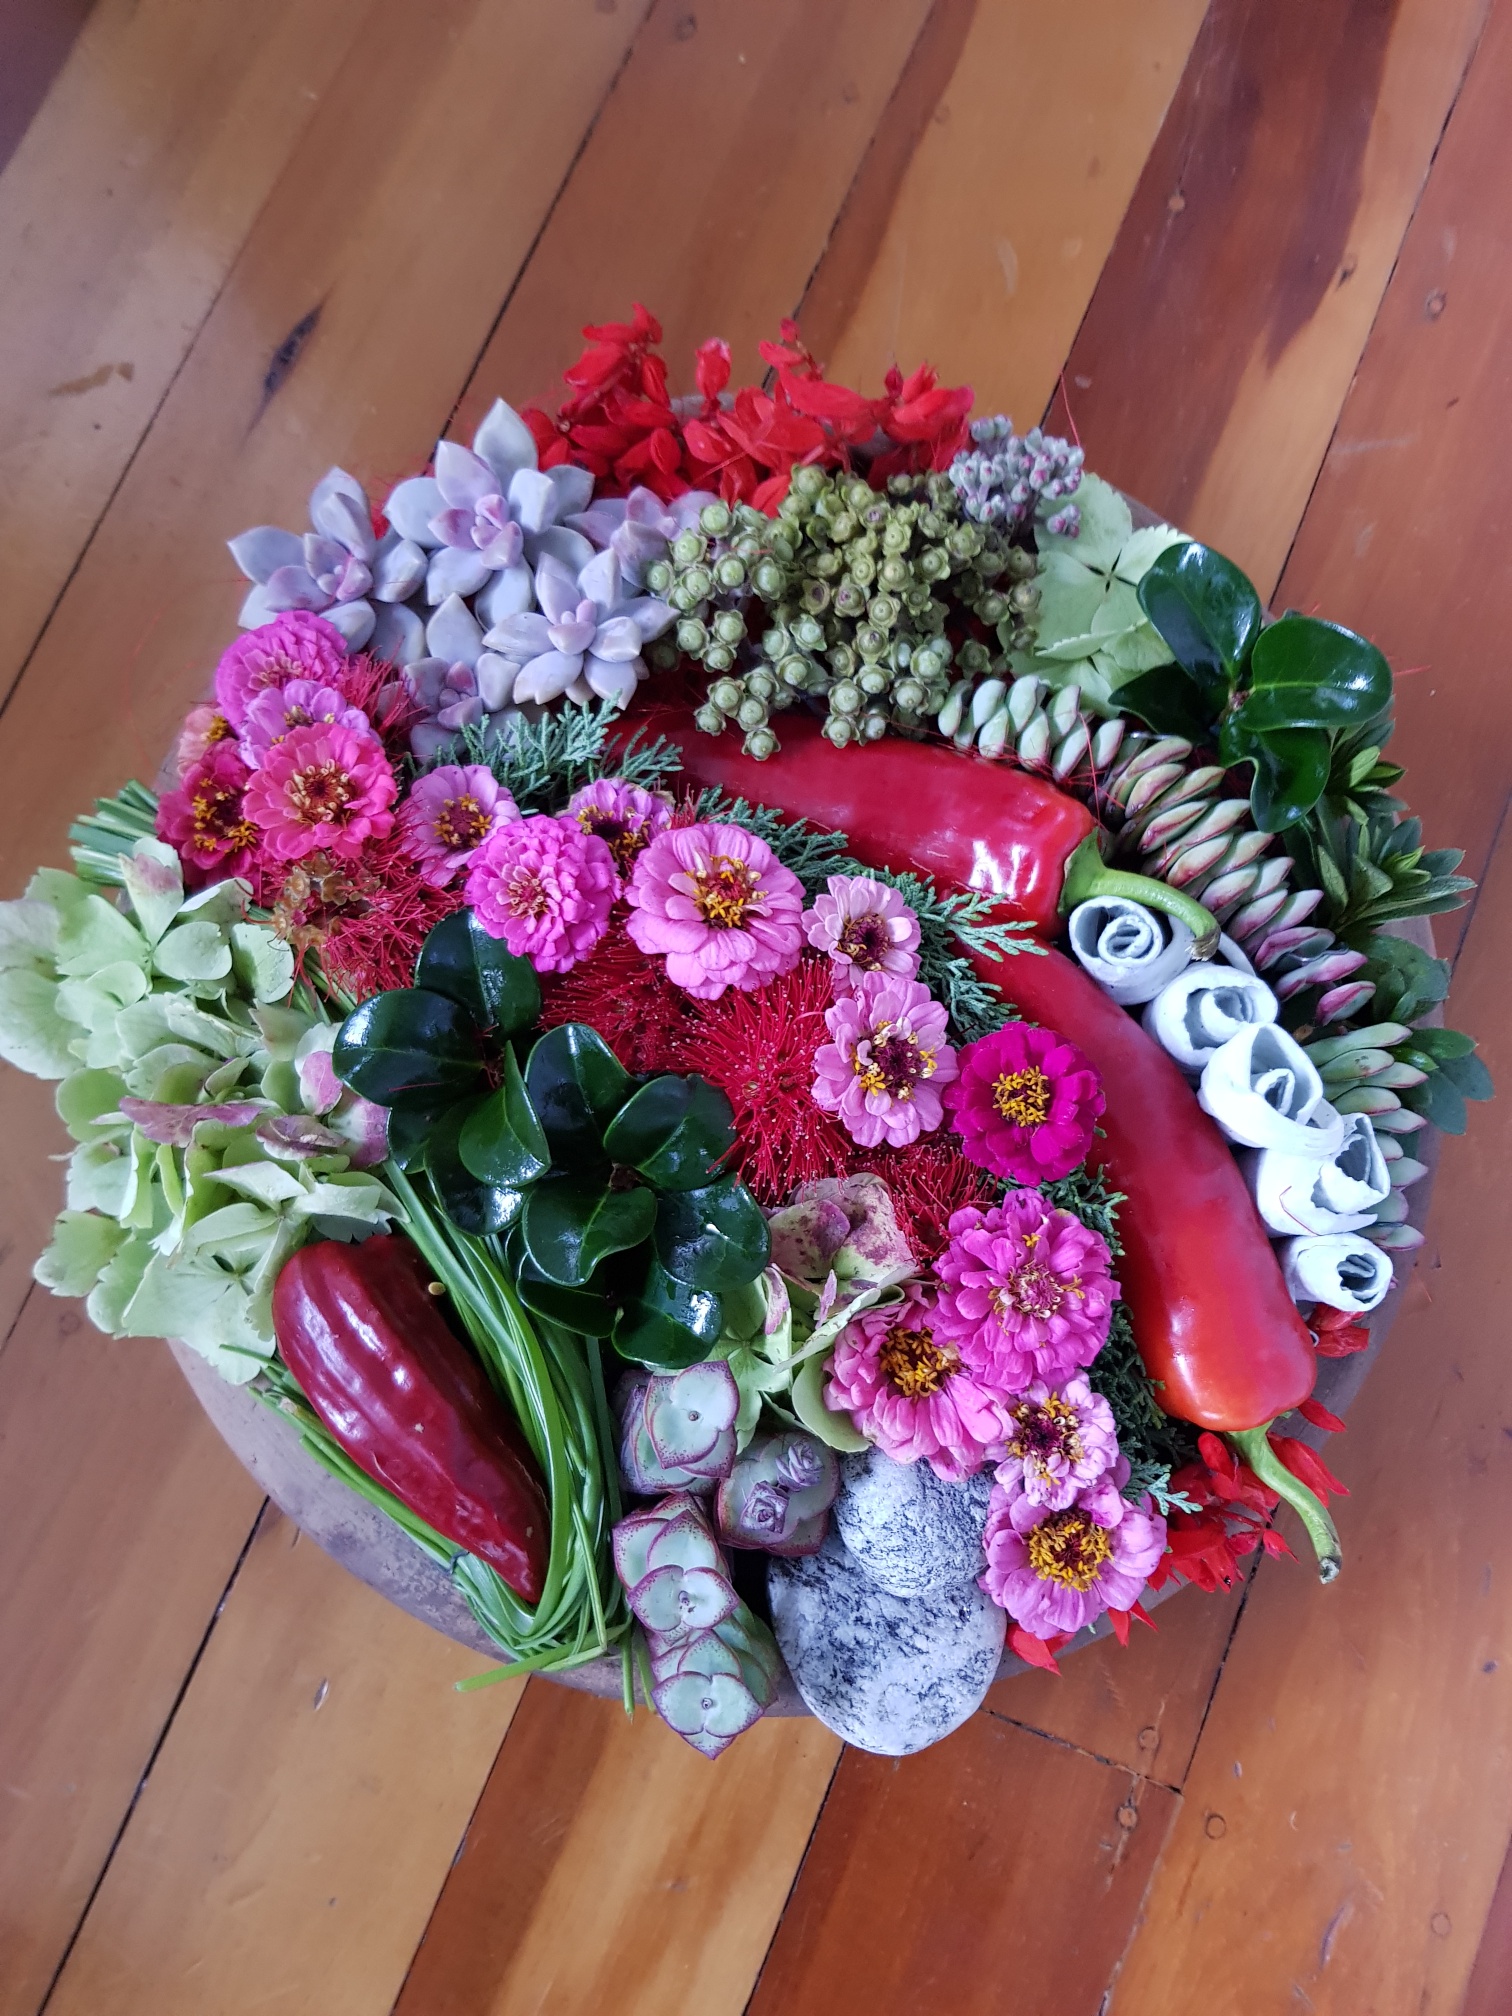 New Plymouth Floral Art Club 0